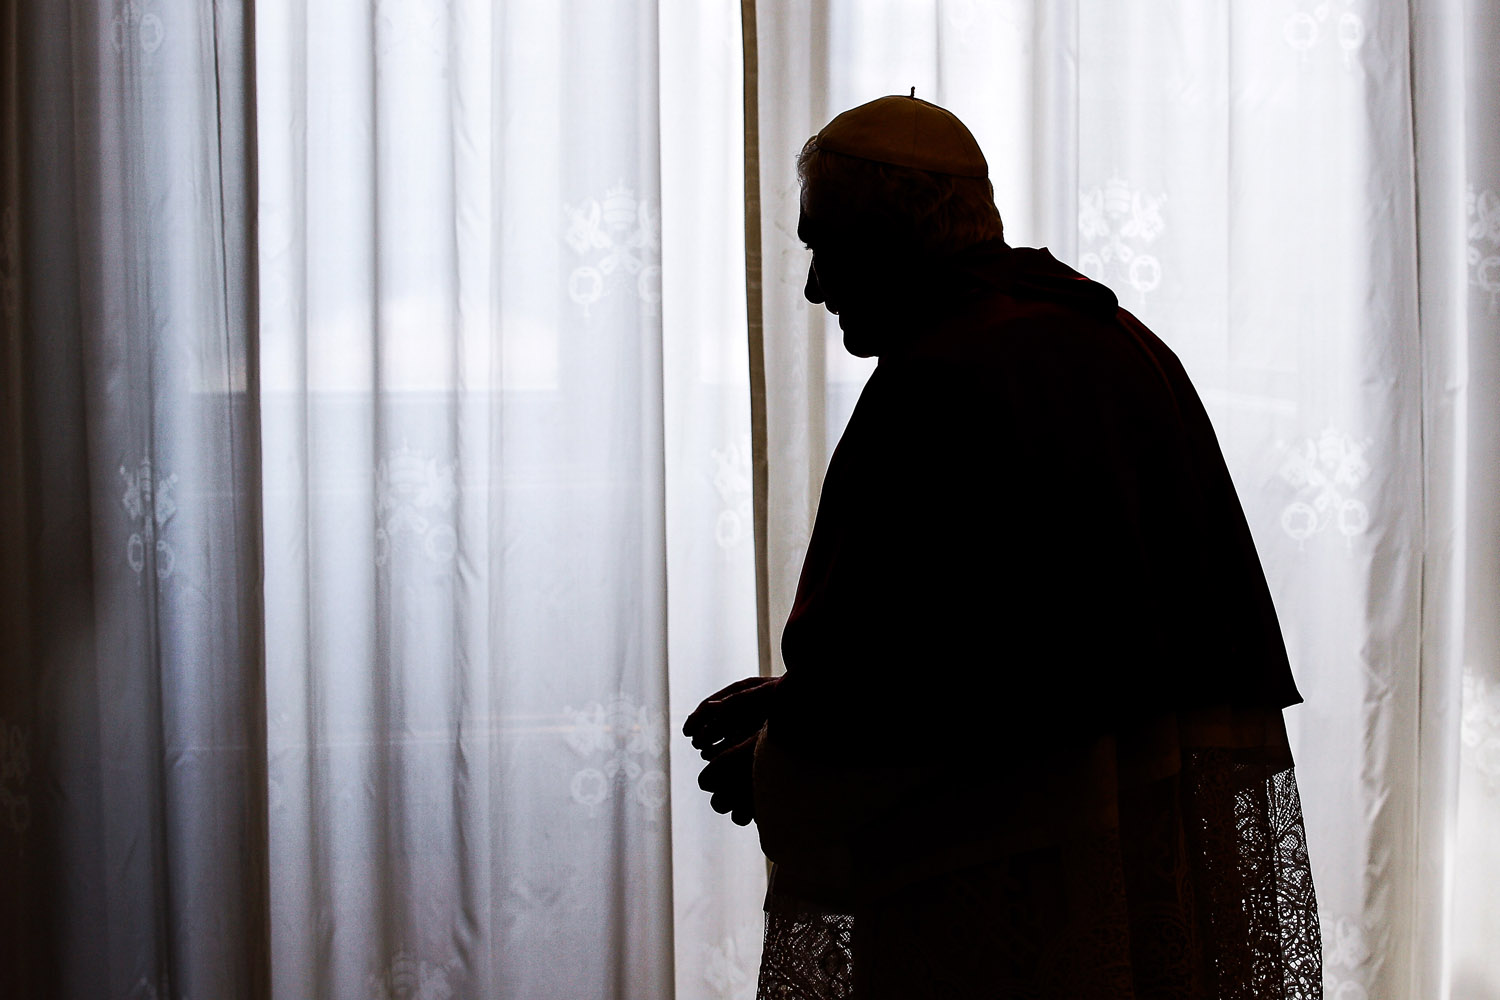 June 8, 2012. Pope Benedict XVI looks on following a meeting with the Sri Lankan President at the Vatican.